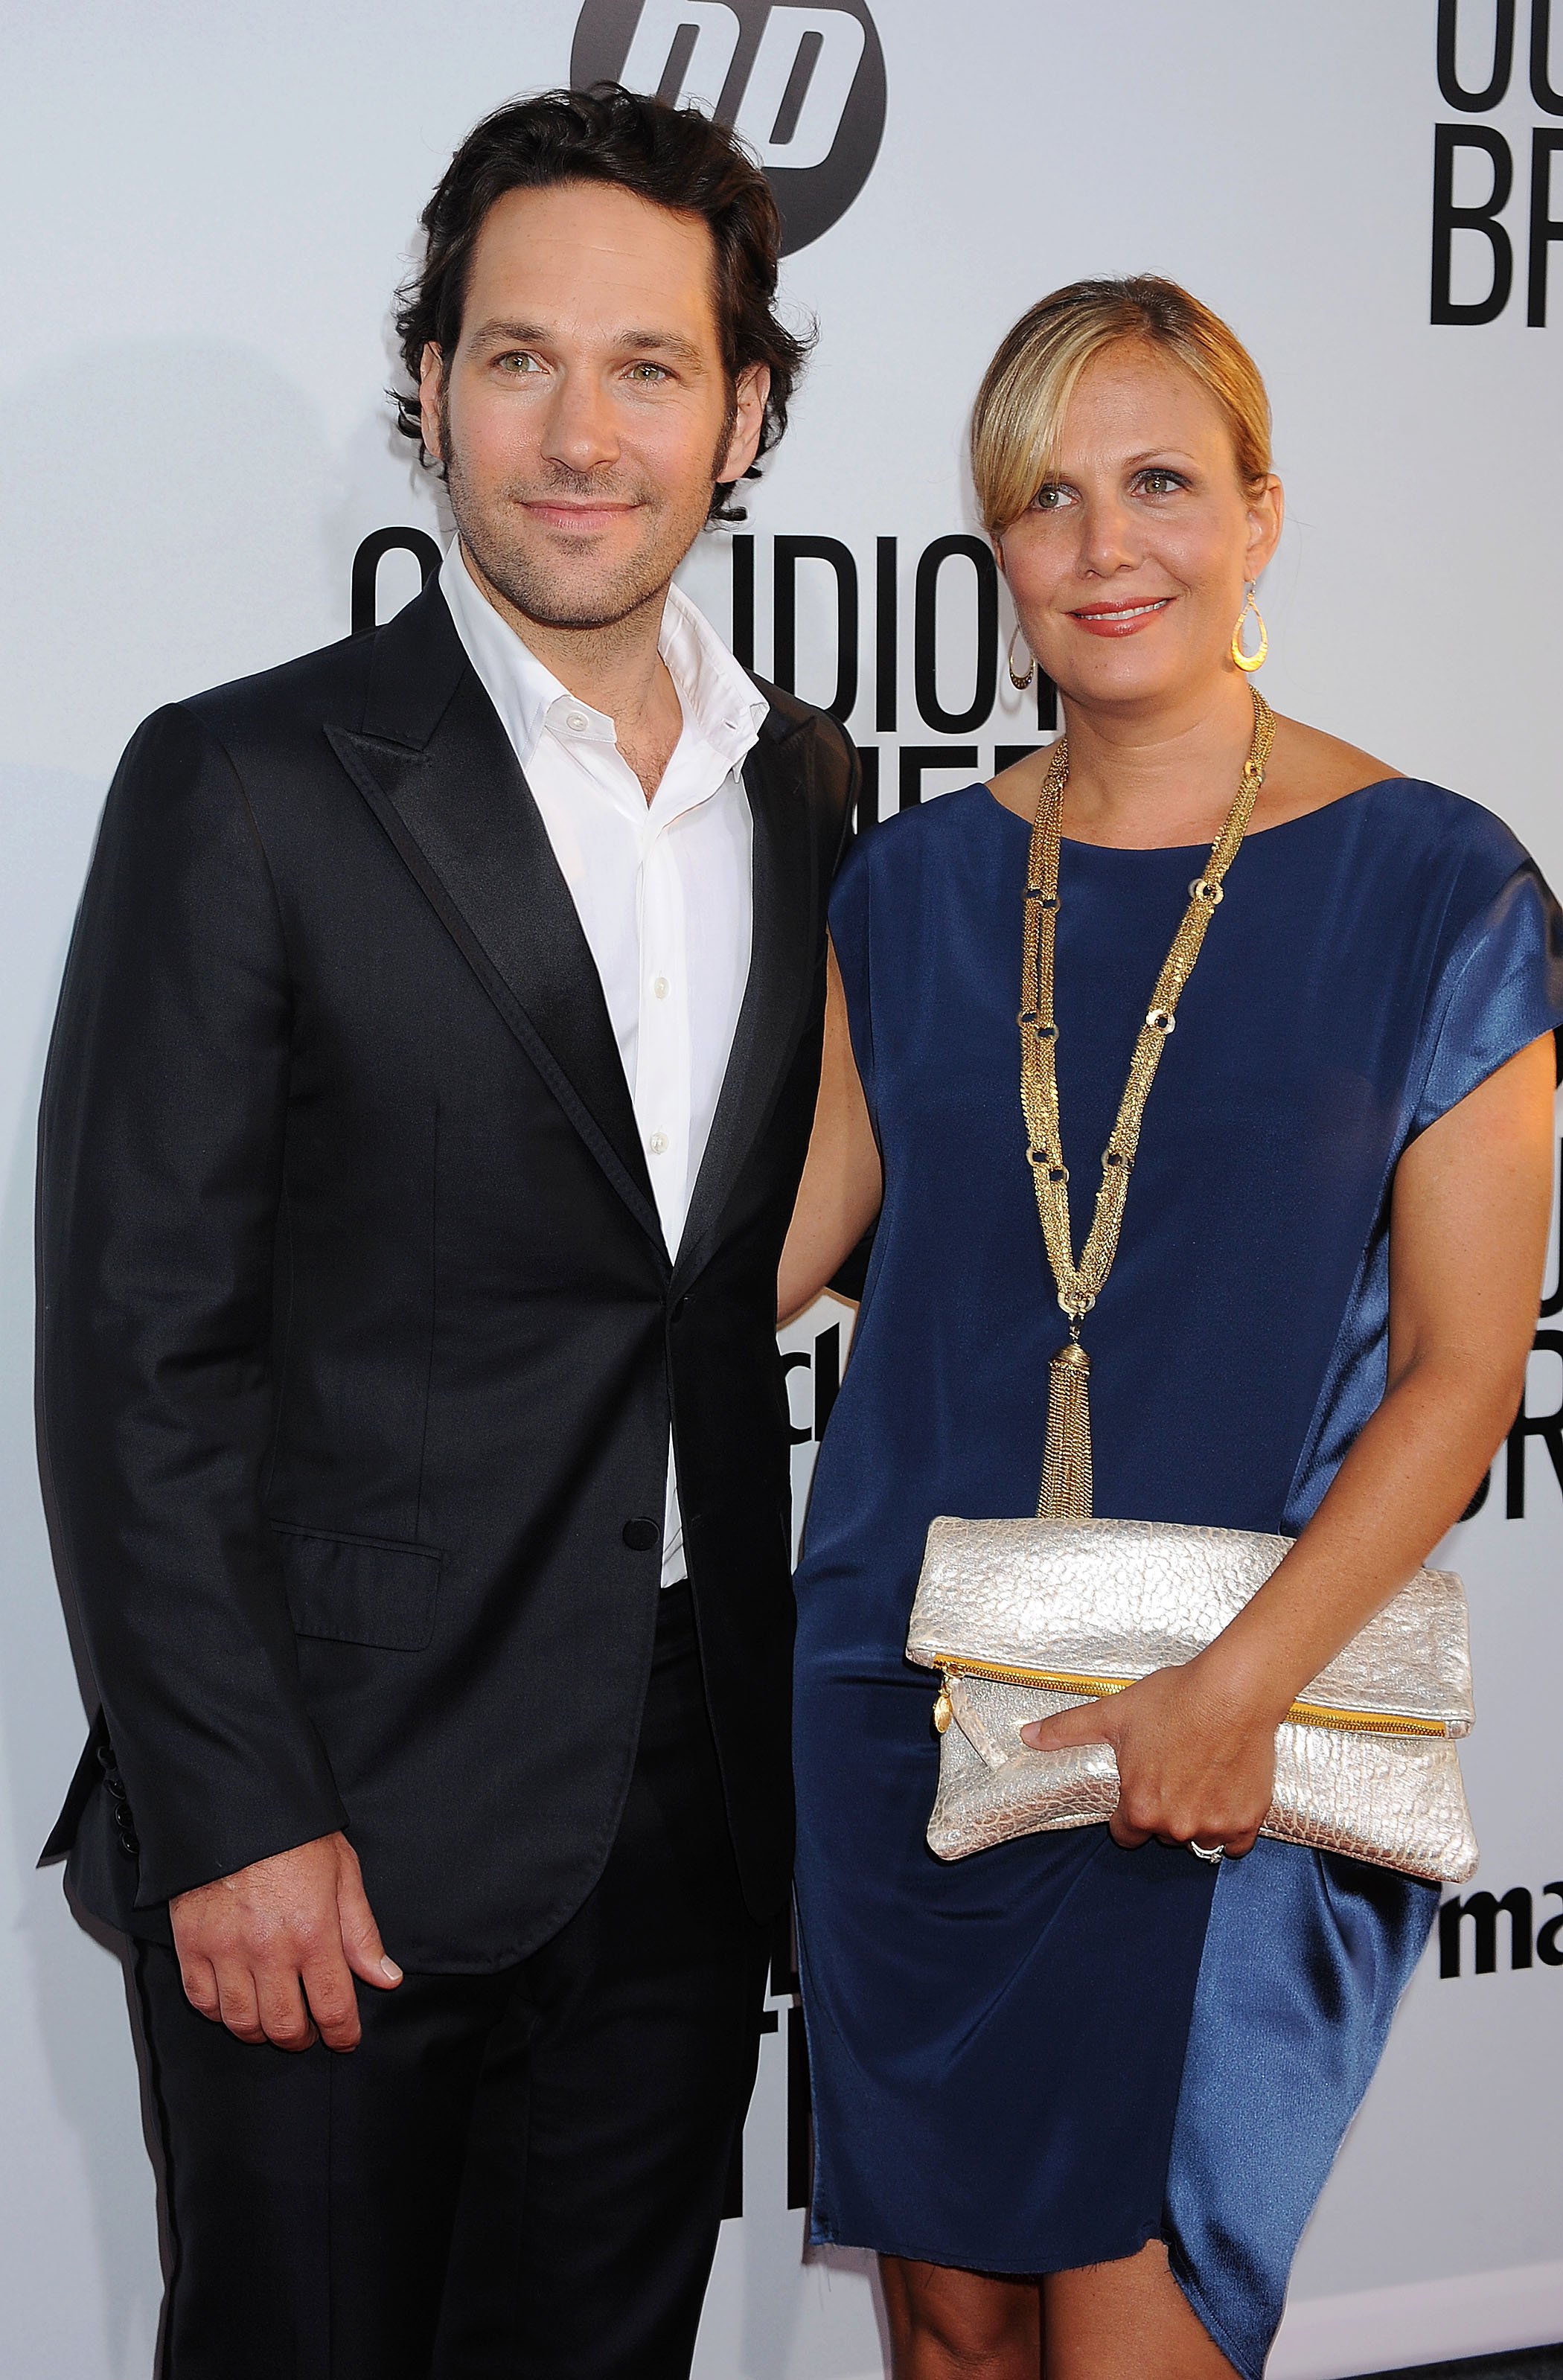 Paul Rudd and his wife Julie Yaeger attend the premiere of "Our Idiot Brother" at ArcLight Hollywood on August 16, 2011, in Hollywood, California. | Source: Getty Images